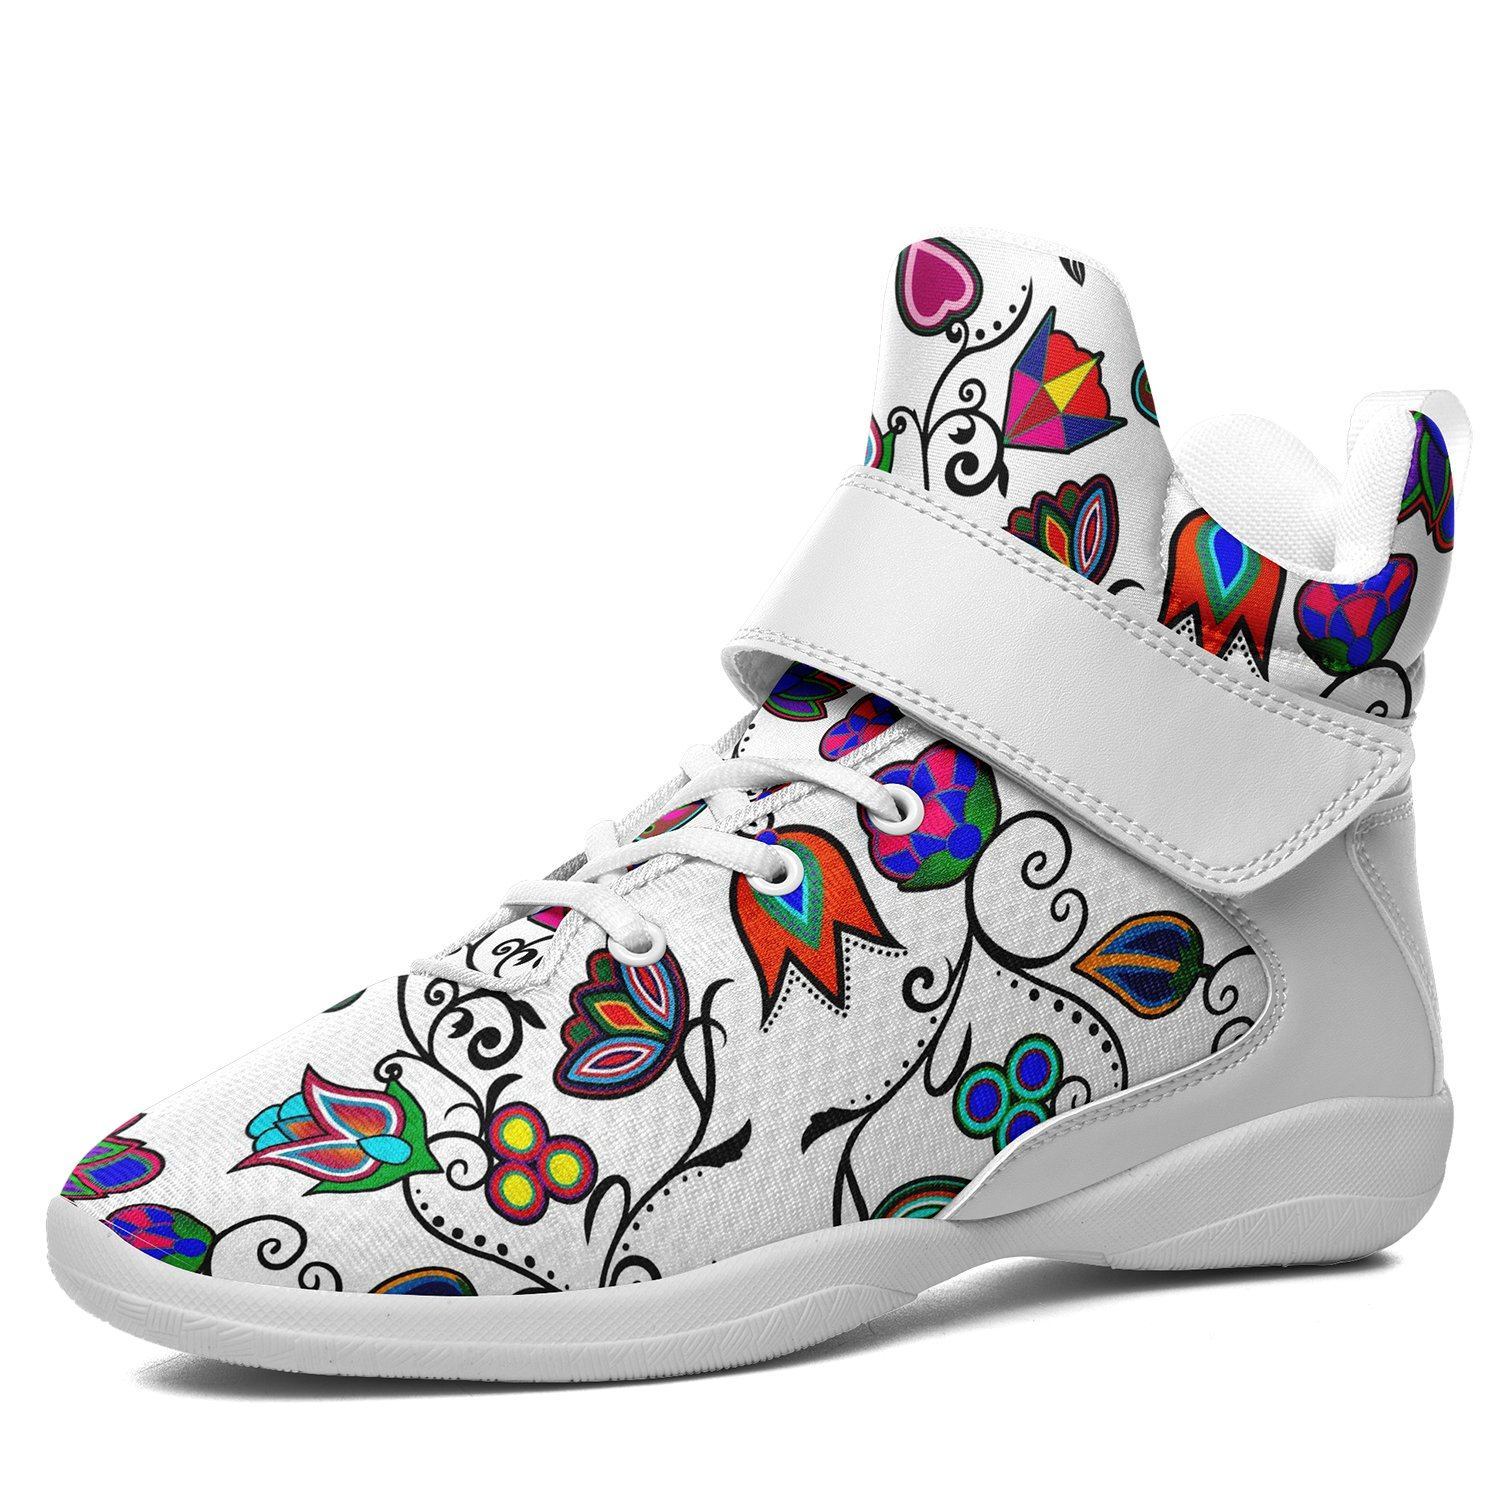 Indigenous Paisley White Kid's Ipottaa Basketball / Sport High Top Shoes 49 Dzine US Child 12.5 / EUR 30 White Sole with White Strap 